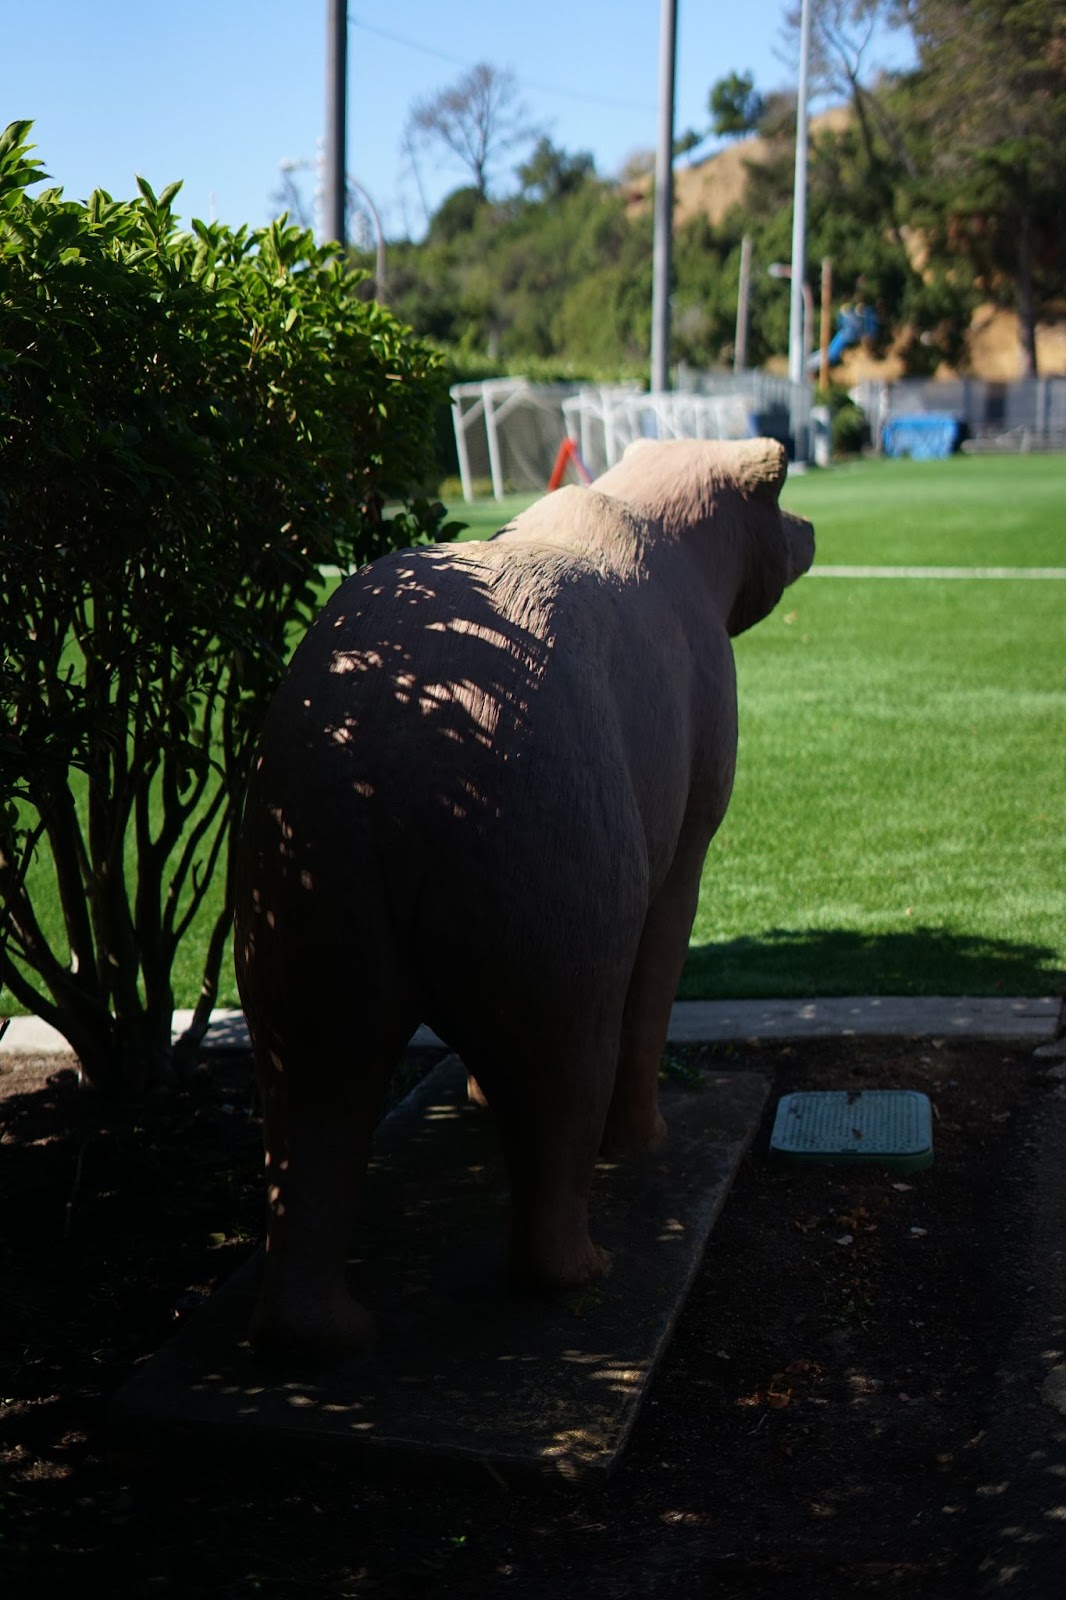 A bear statue surrounded by parking railings and bushes. 